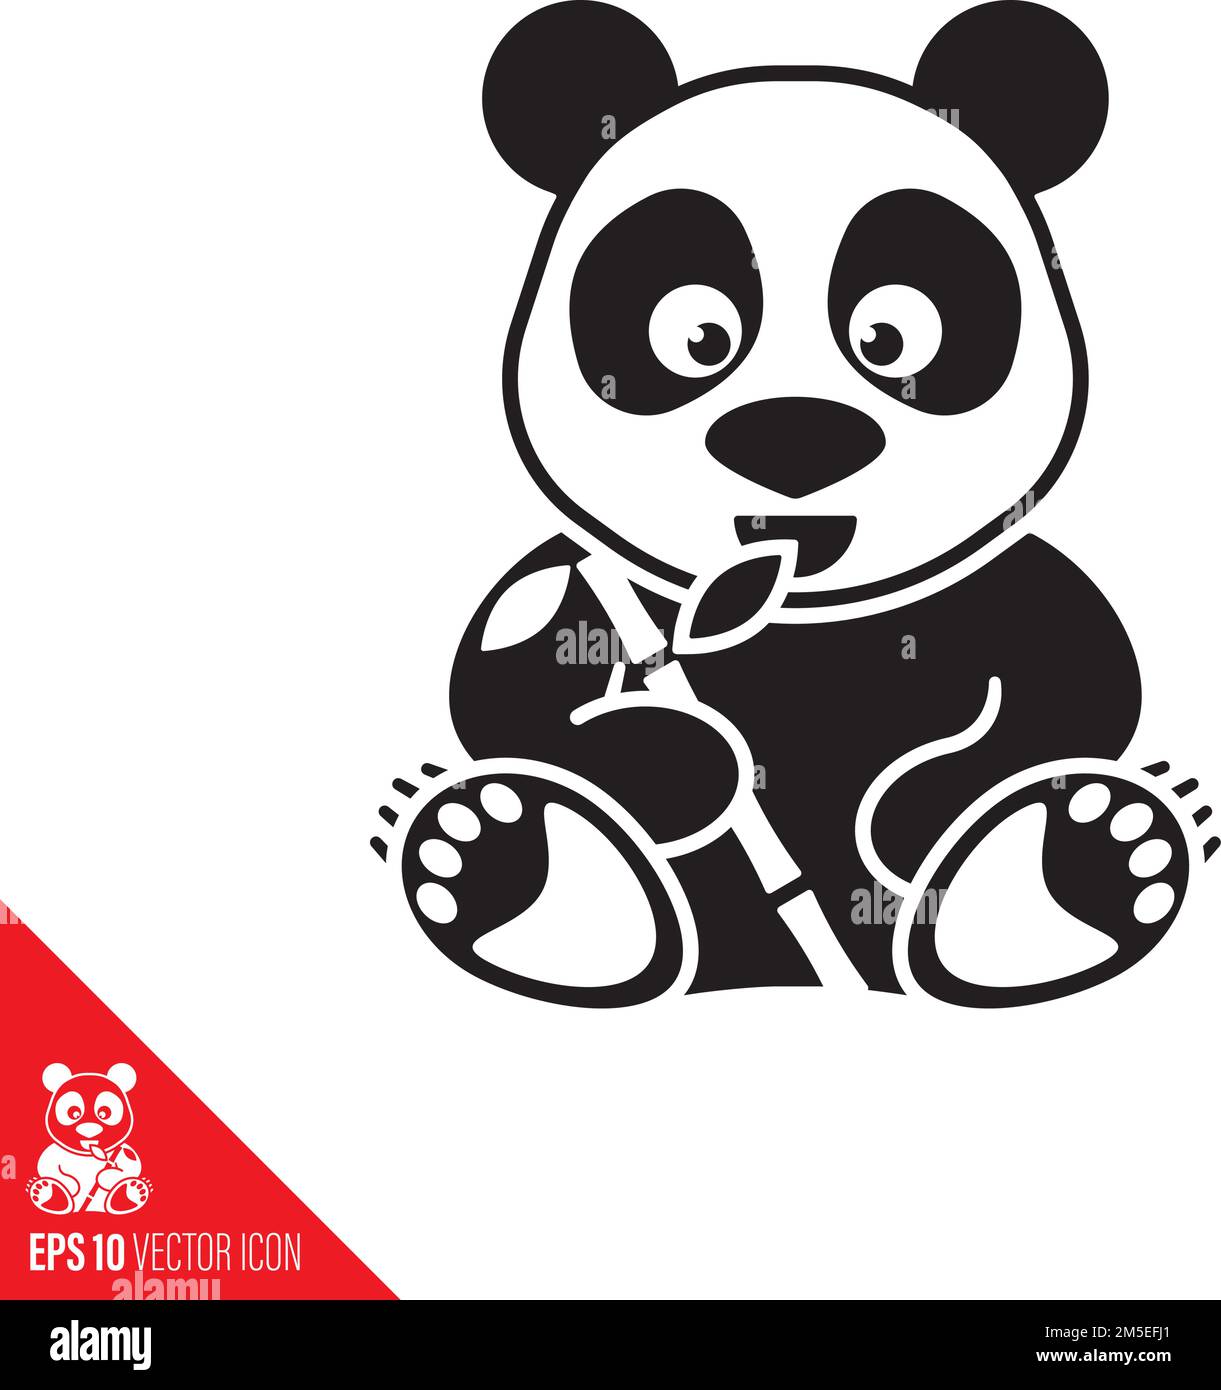 Premium Vector  Vector black and white template funny panda silhouette of  illustration for newborn and nursery design